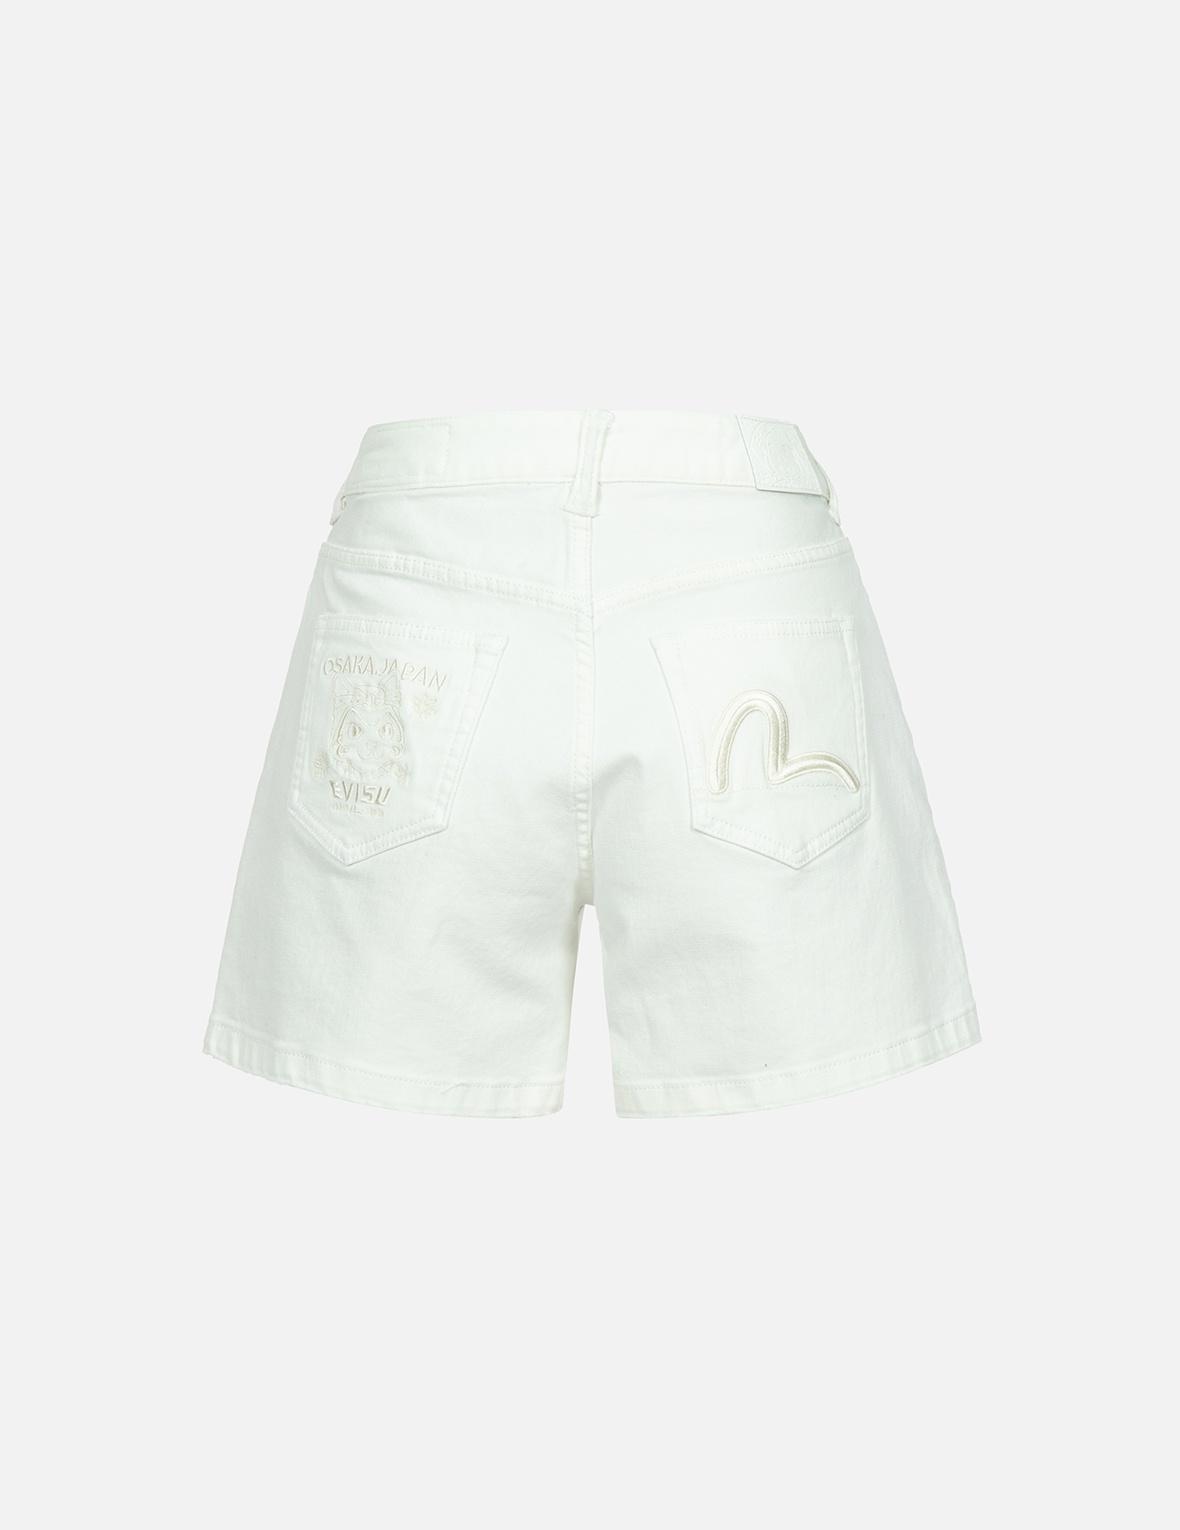 LUCKY CAT AND SEAGULL EMBROIDERY WHITE DENIM SHORTS - 1